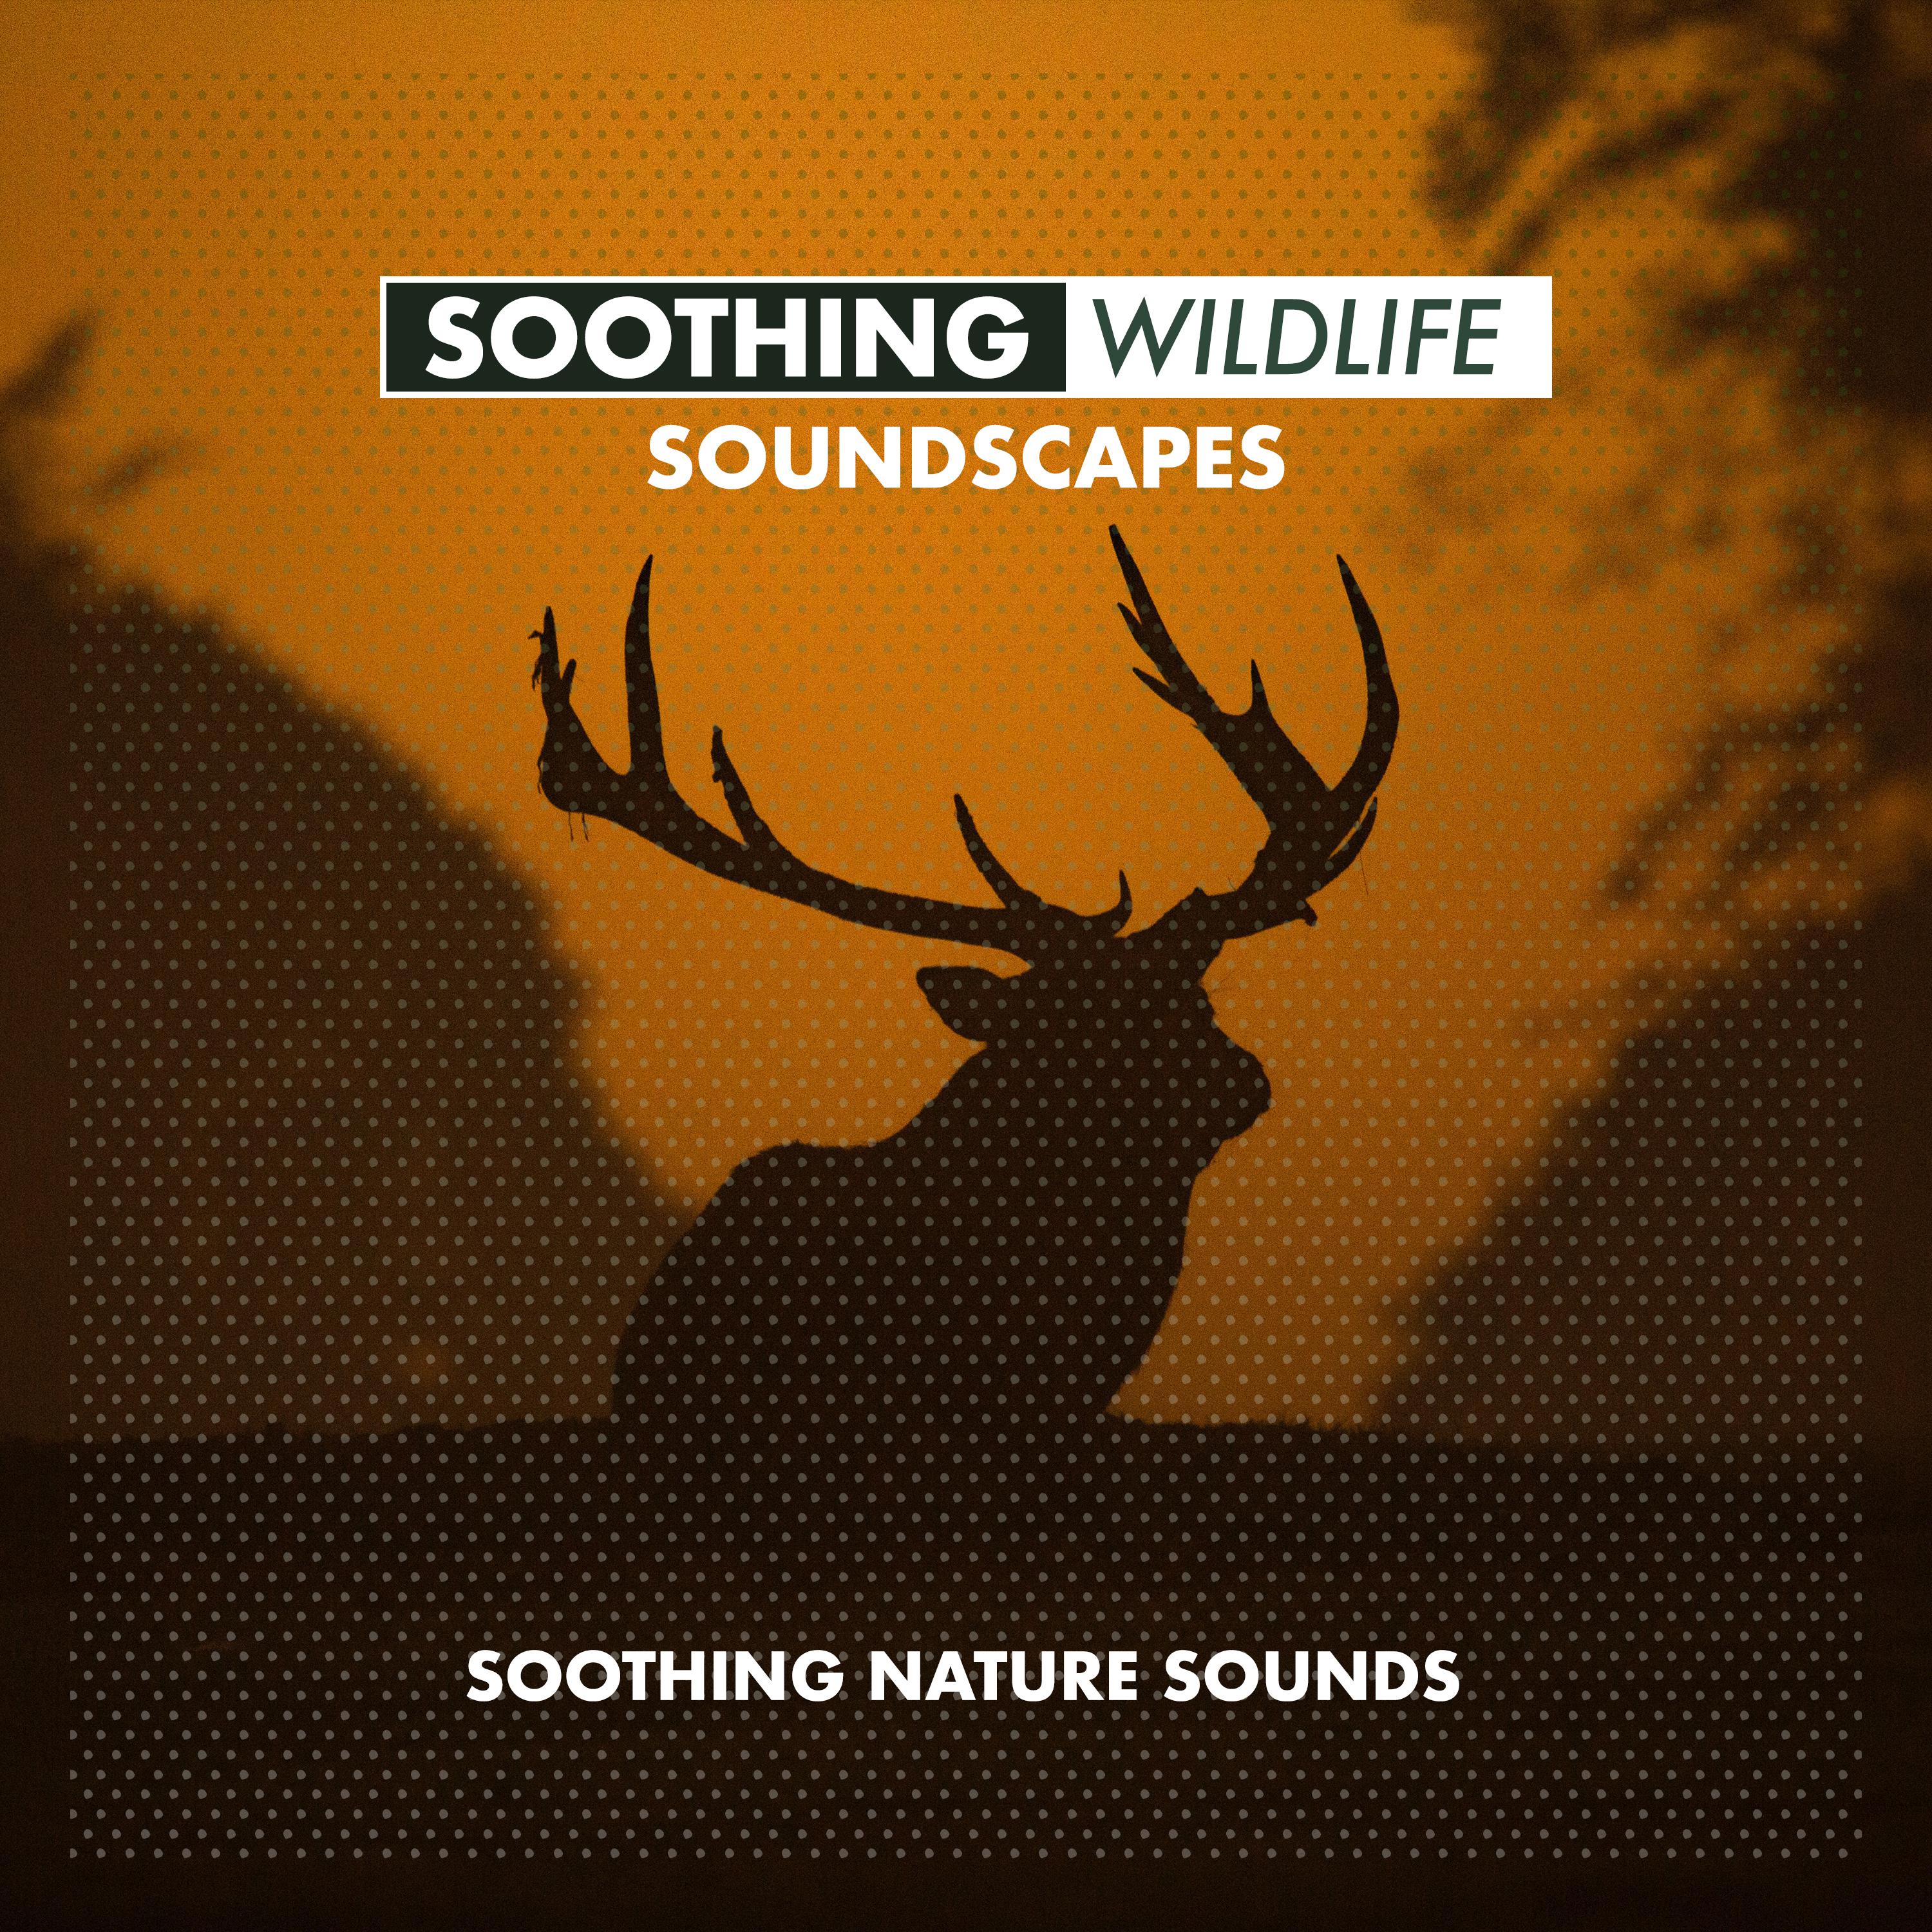 Soothing Wildlife Soundscapes